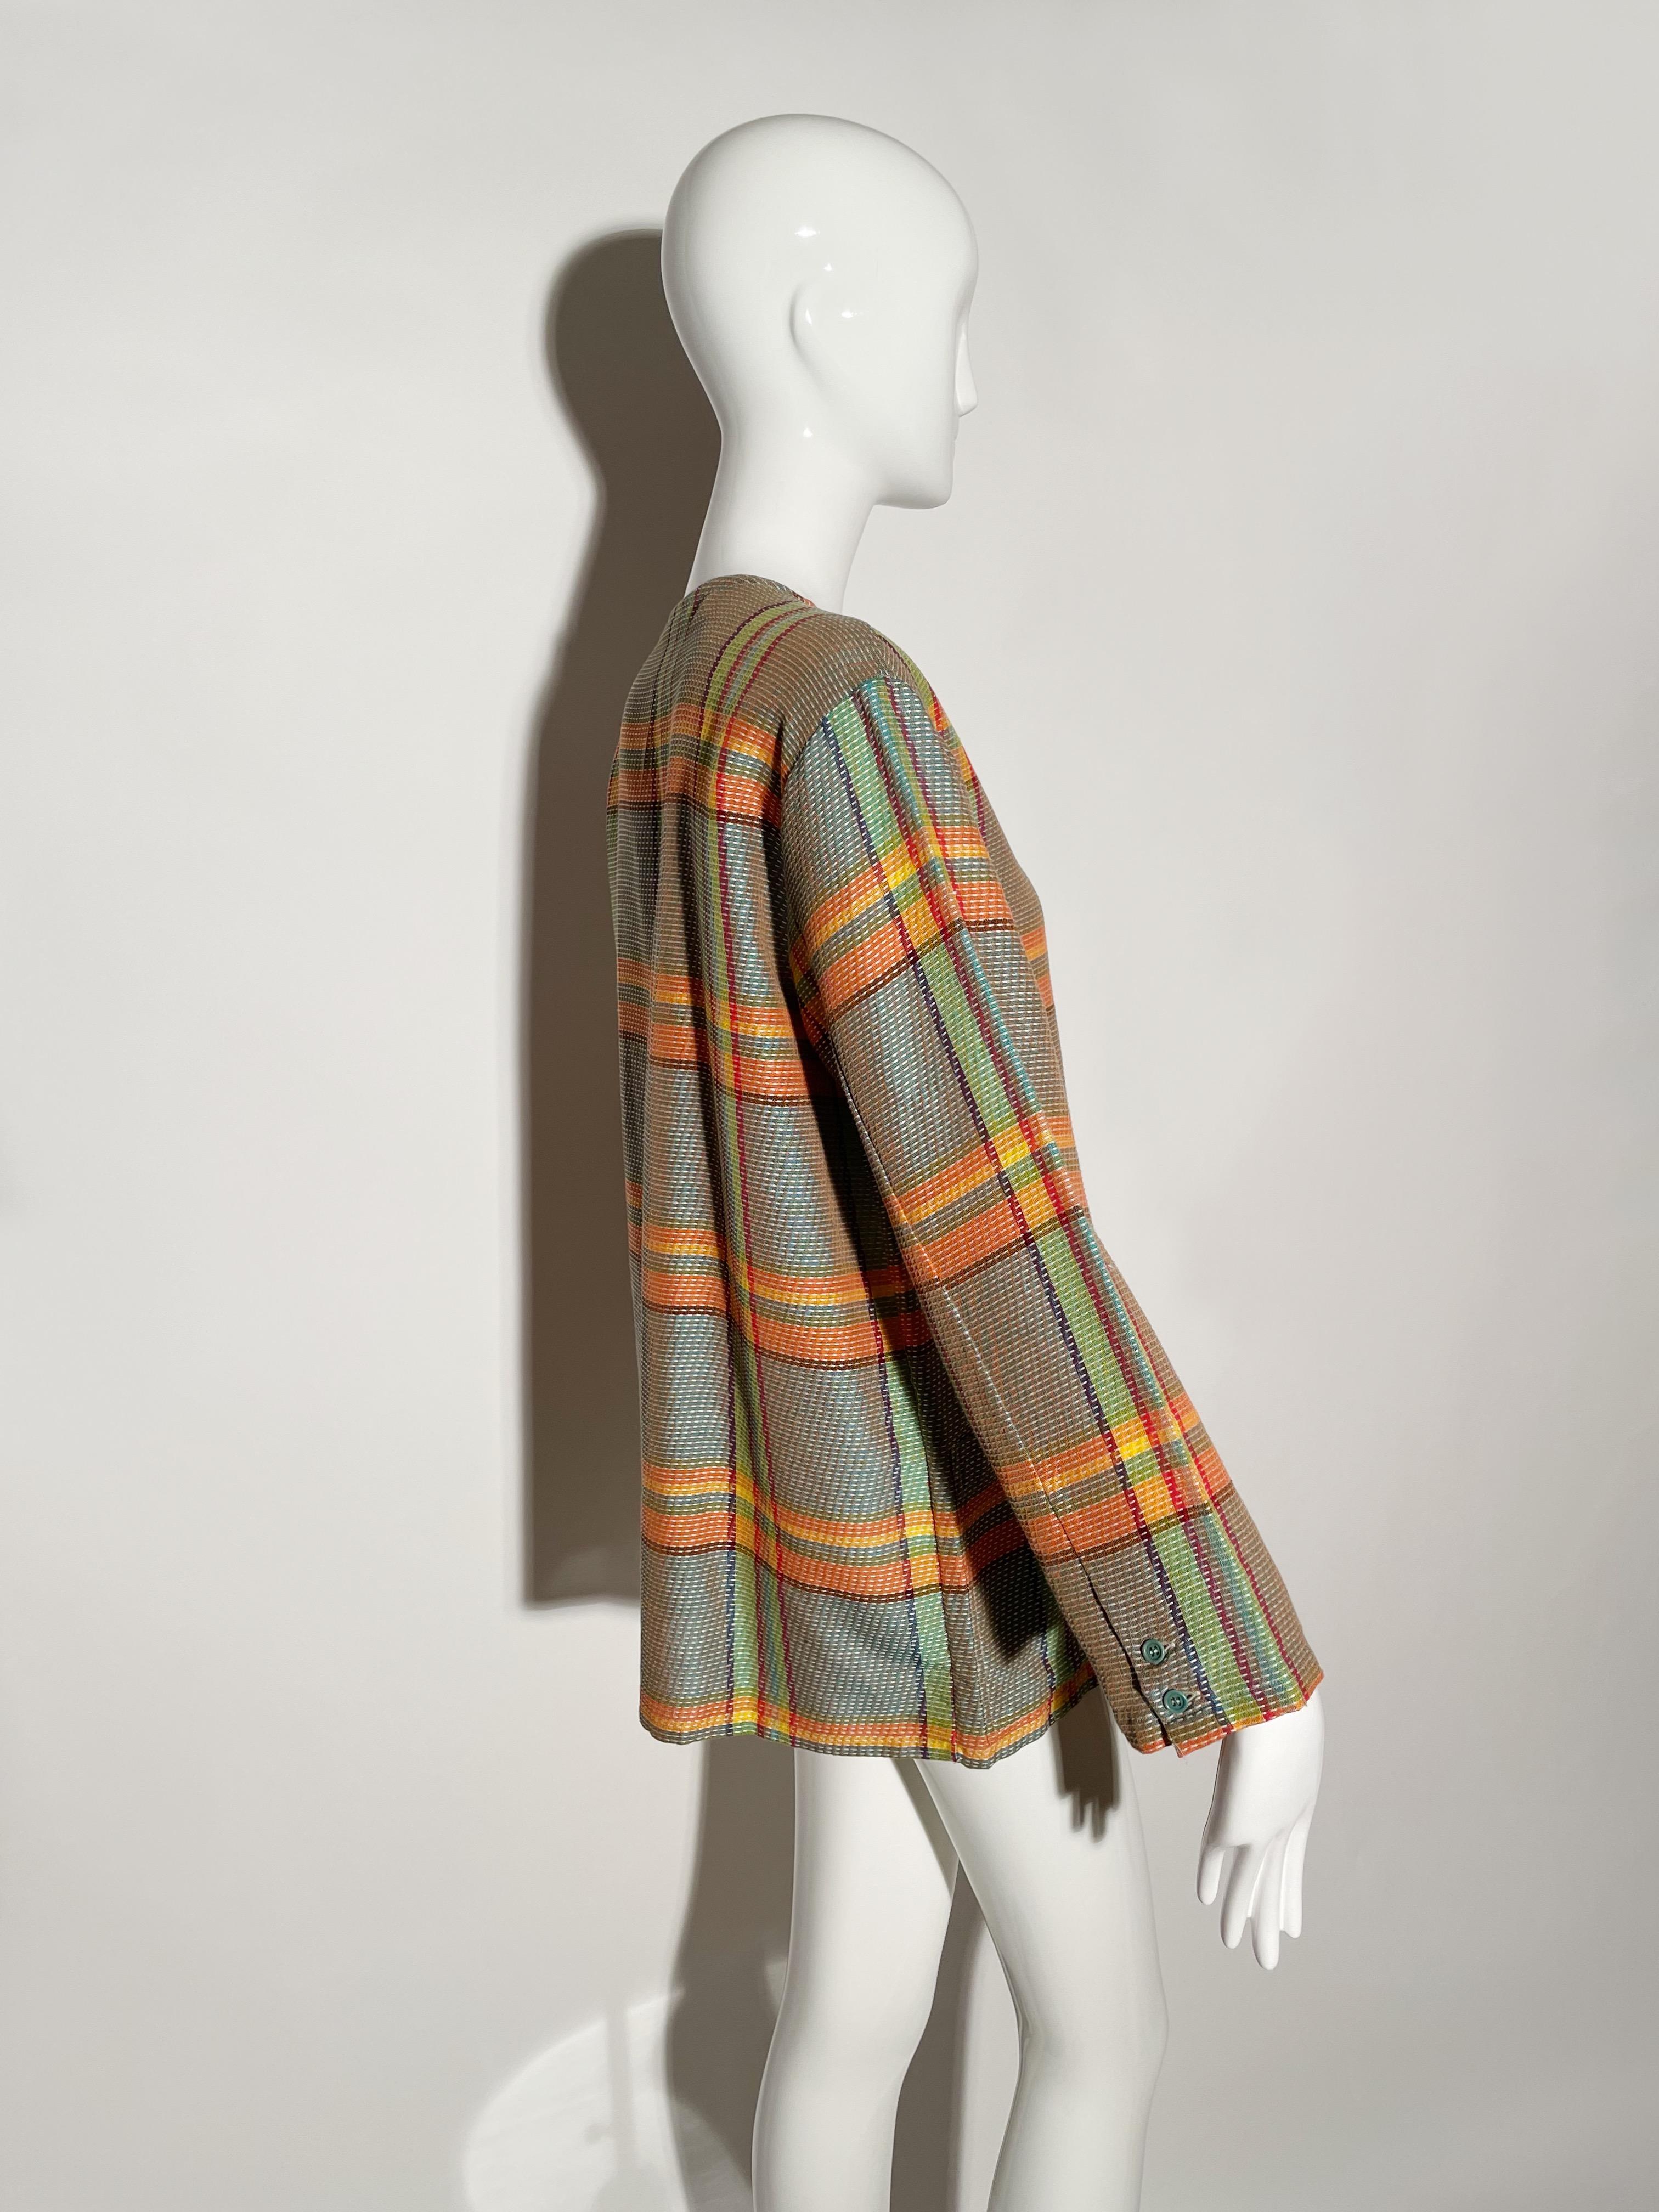 Missoni Plaid Button Down Blouse  In Excellent Condition For Sale In Los Angeles, CA